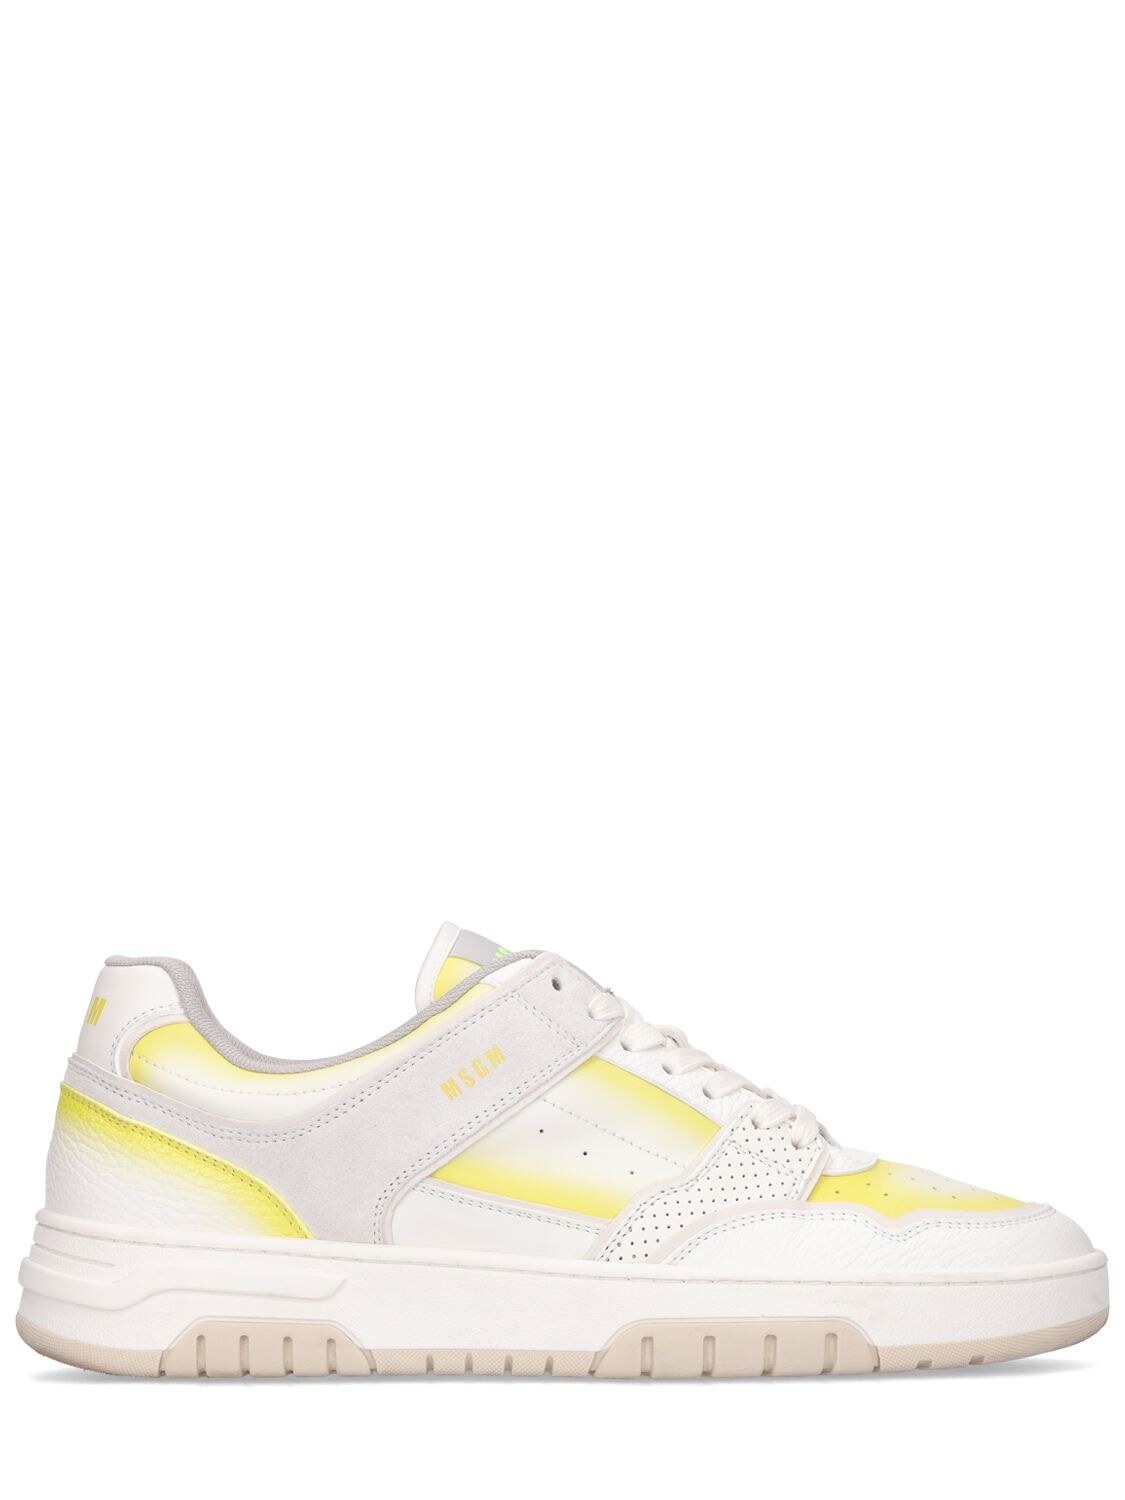 MSGM AIRBRUSH LEATHER LOW TOP SNEAKERS